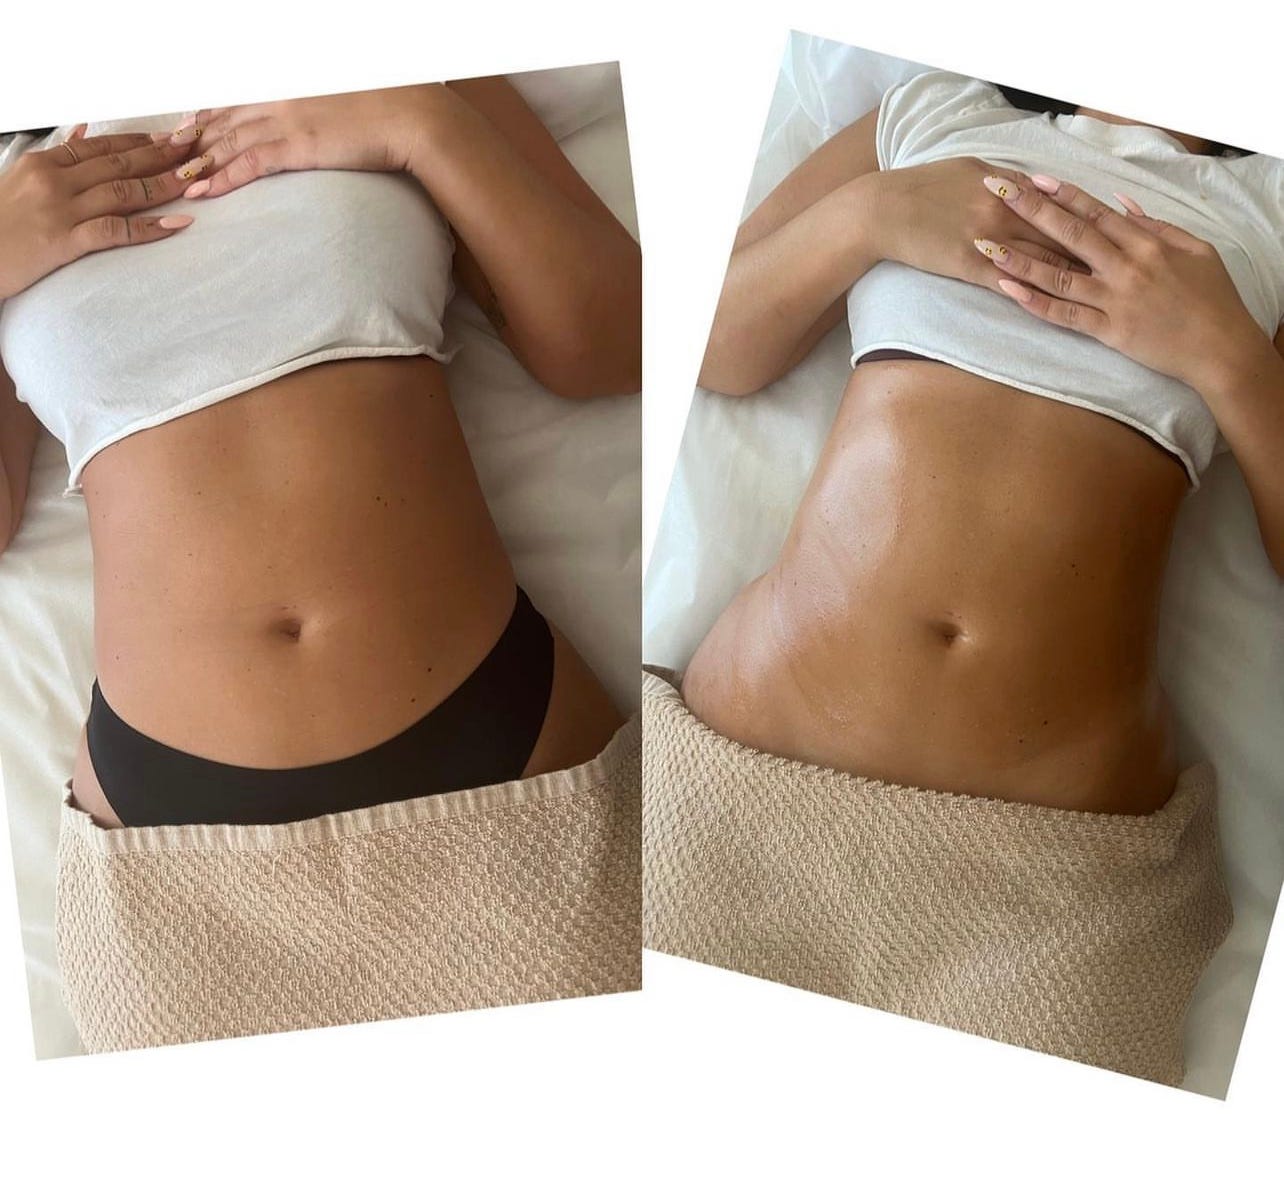 Ultrasonic Cavitation vs Laser Lipo Body Sculpting and Contouring. Which  one's better?, by Body Sculpting